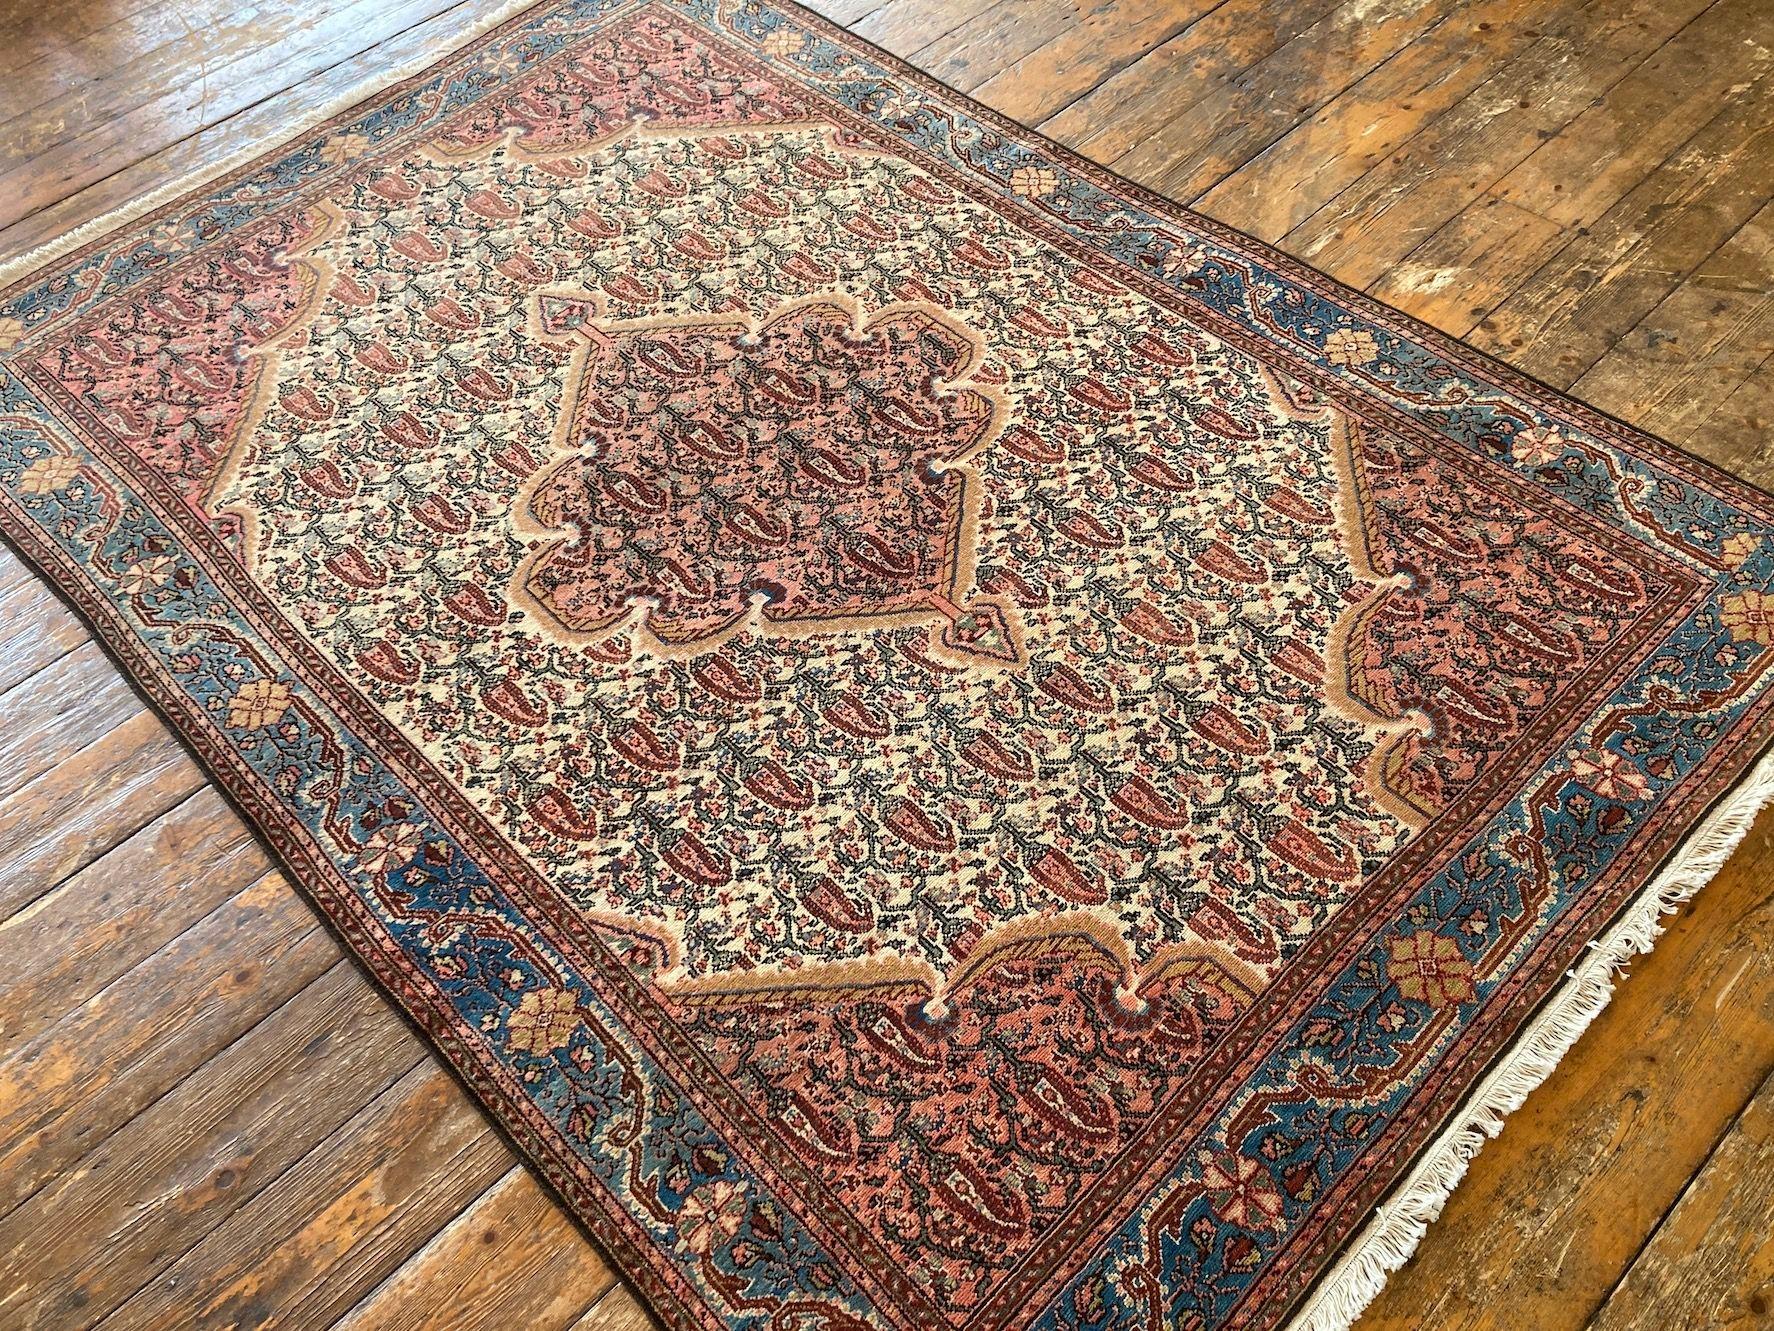 Early 20th Century Antique Malayer Rug 1.97m X 1.32m For Sale